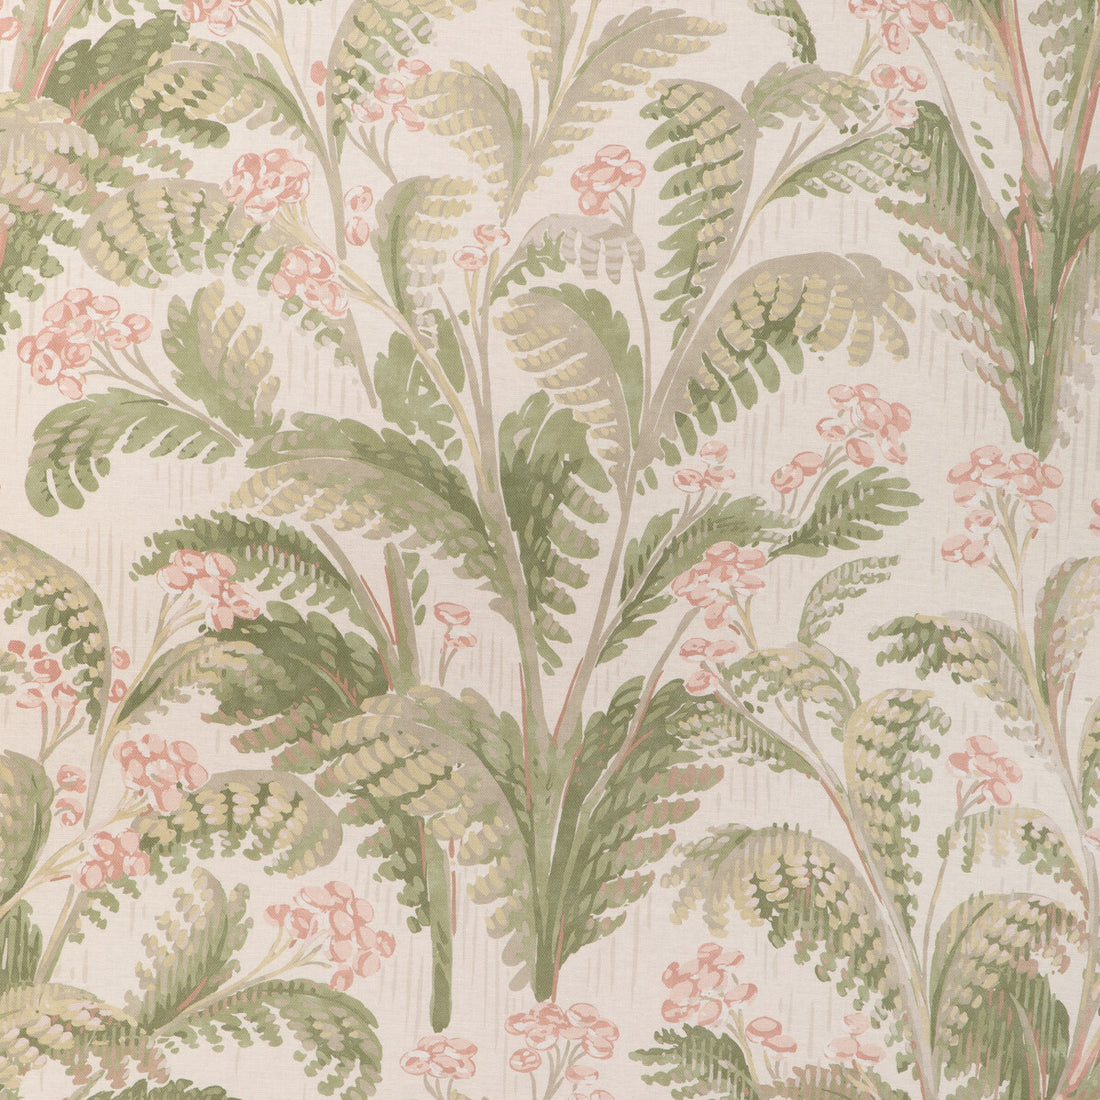 Pashley Print fabric in blush color - pattern 2023140.317.0 - by Lee Jofa in the Garden Walk collection